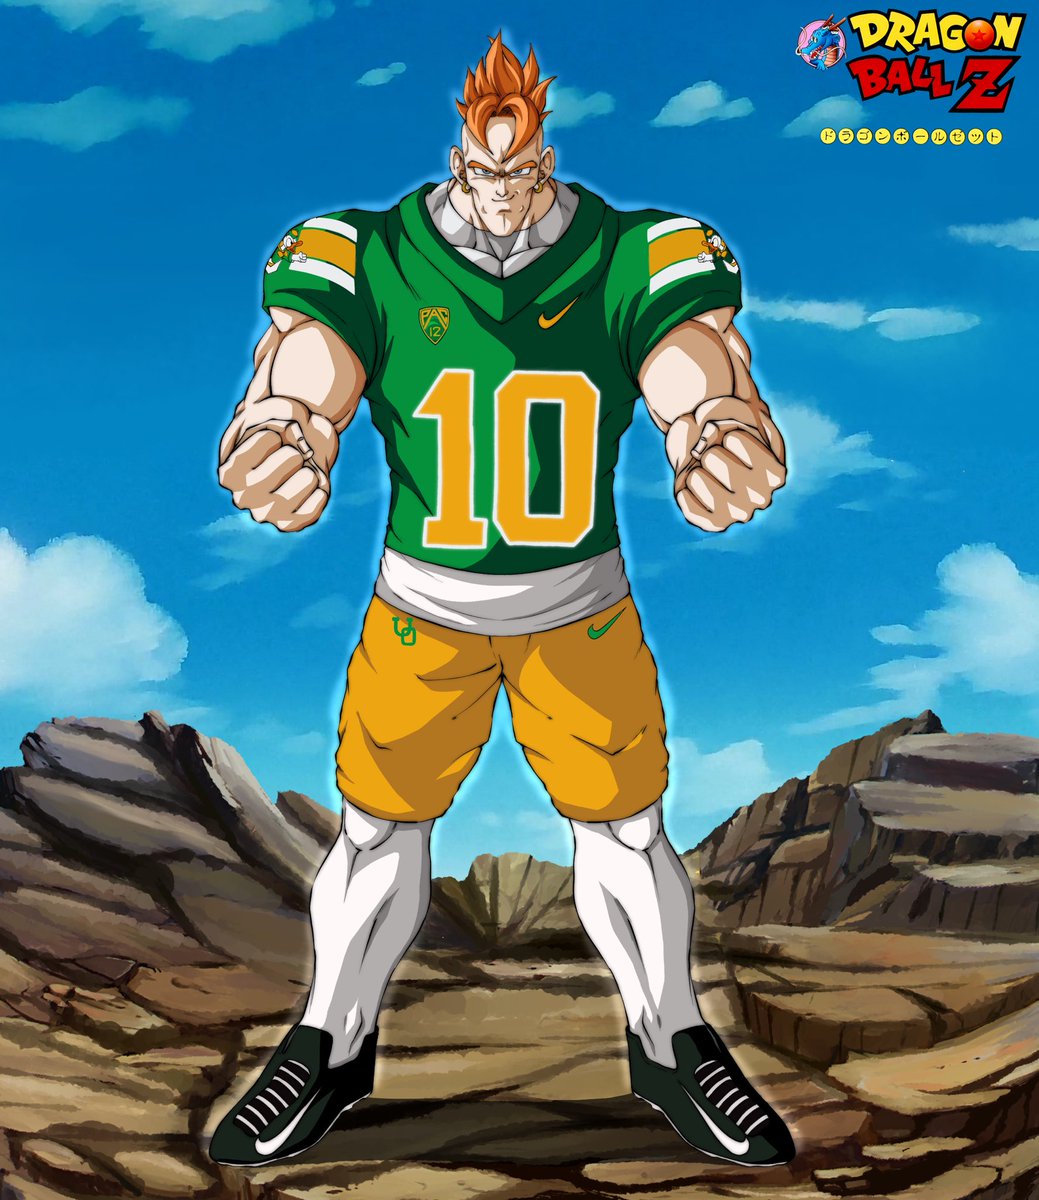 In the Dragon Ball Z x #NFLDraft project. Bo Nix is Android 16. Both misunderstood and judged after their 1st appearances. A change of scenery and finding their people made all the difference and woke up the beast within them to become machine like in their execution.